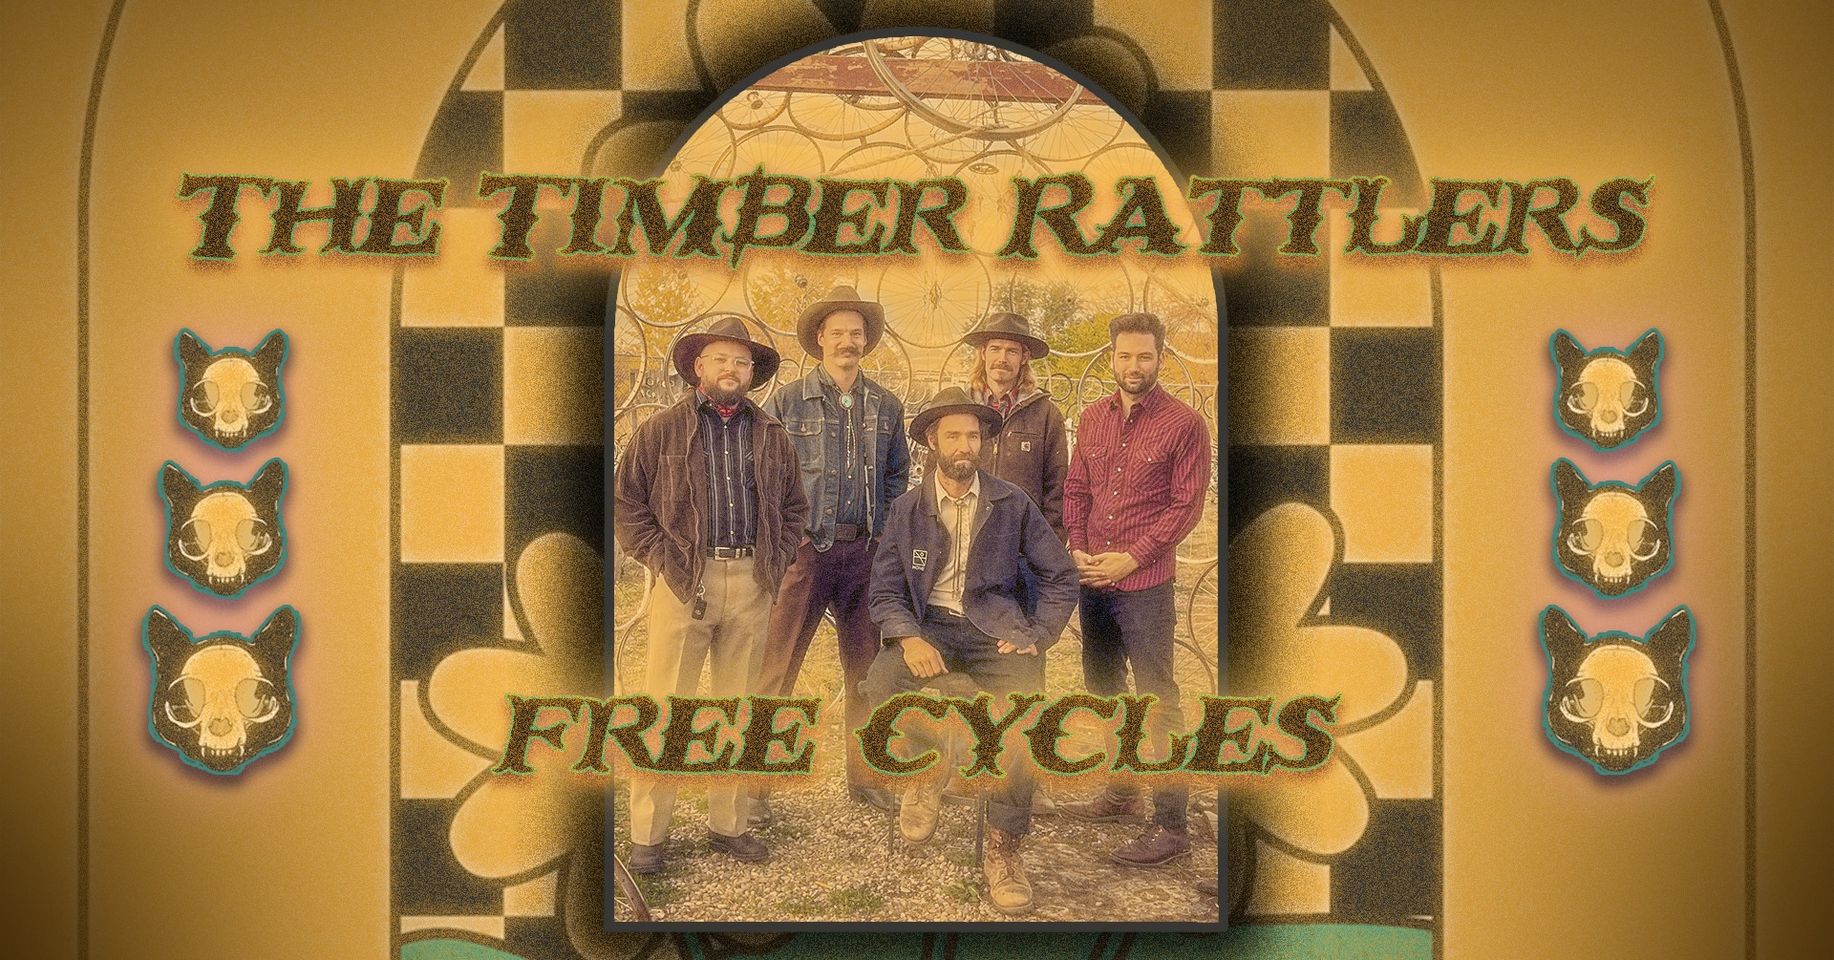 The Timber Rattlers at Free Cycles